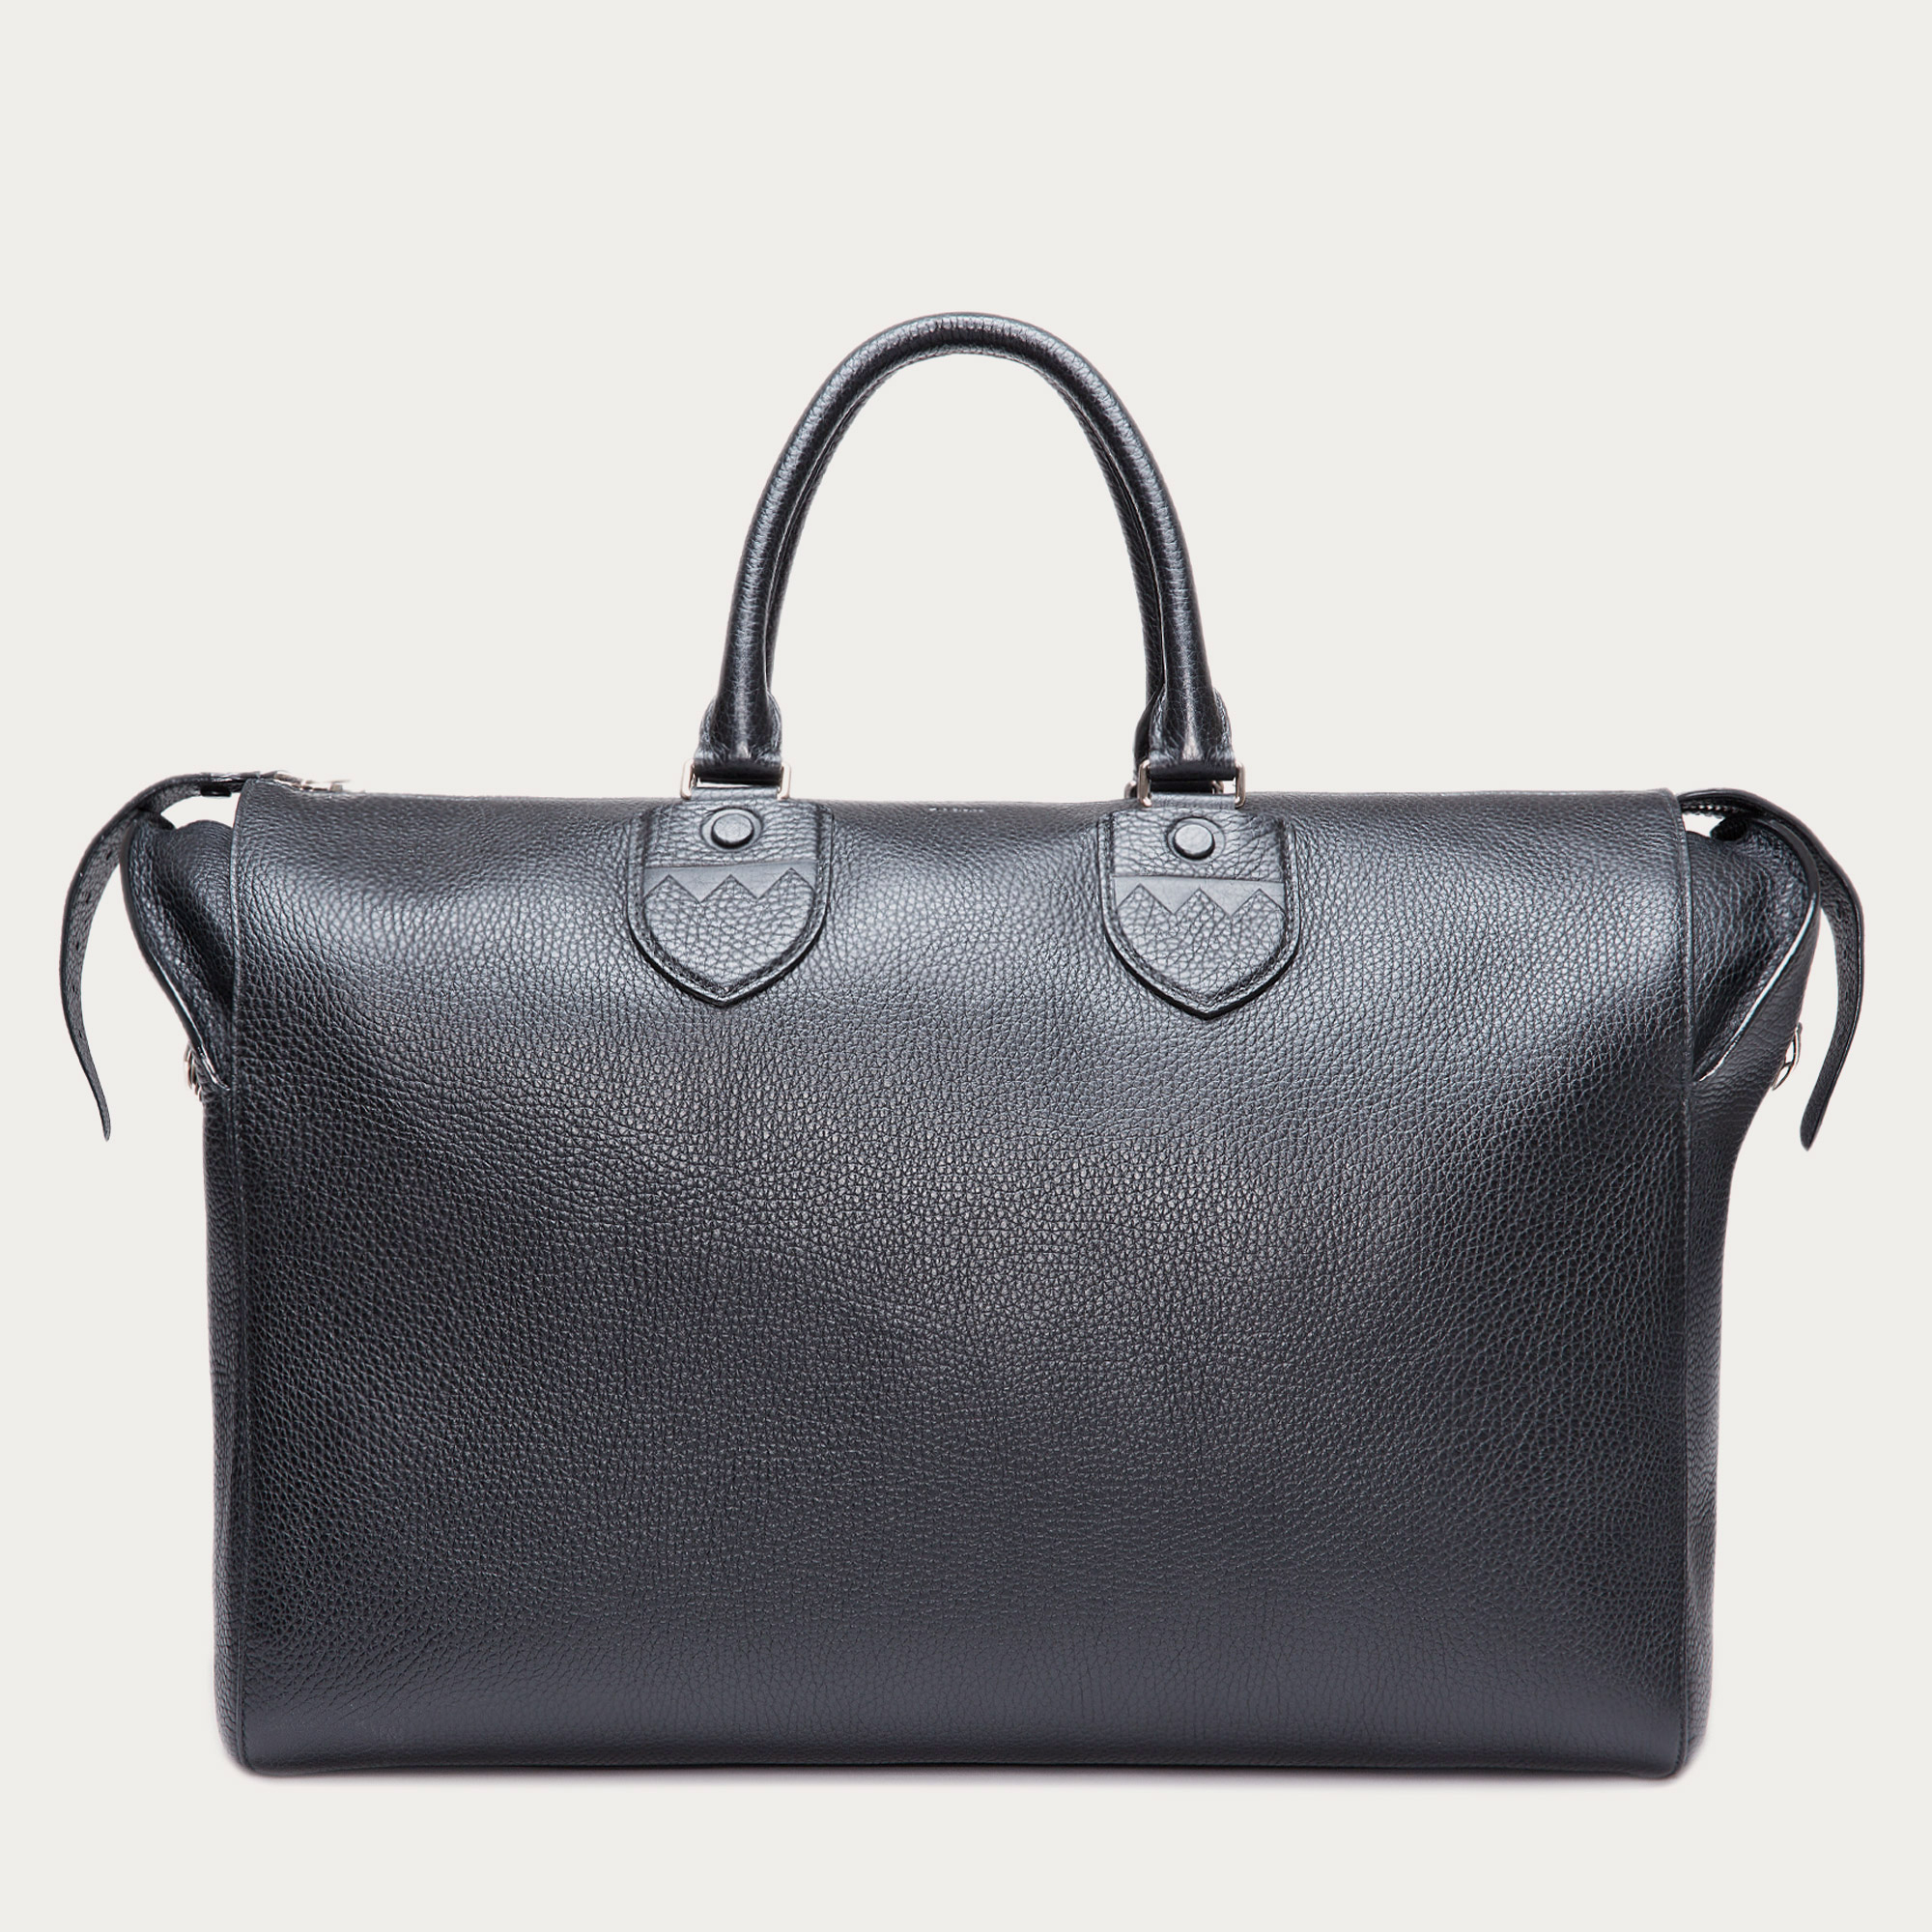 Lyst - Bally Perforated Leather Duffel Bag in Black for Men